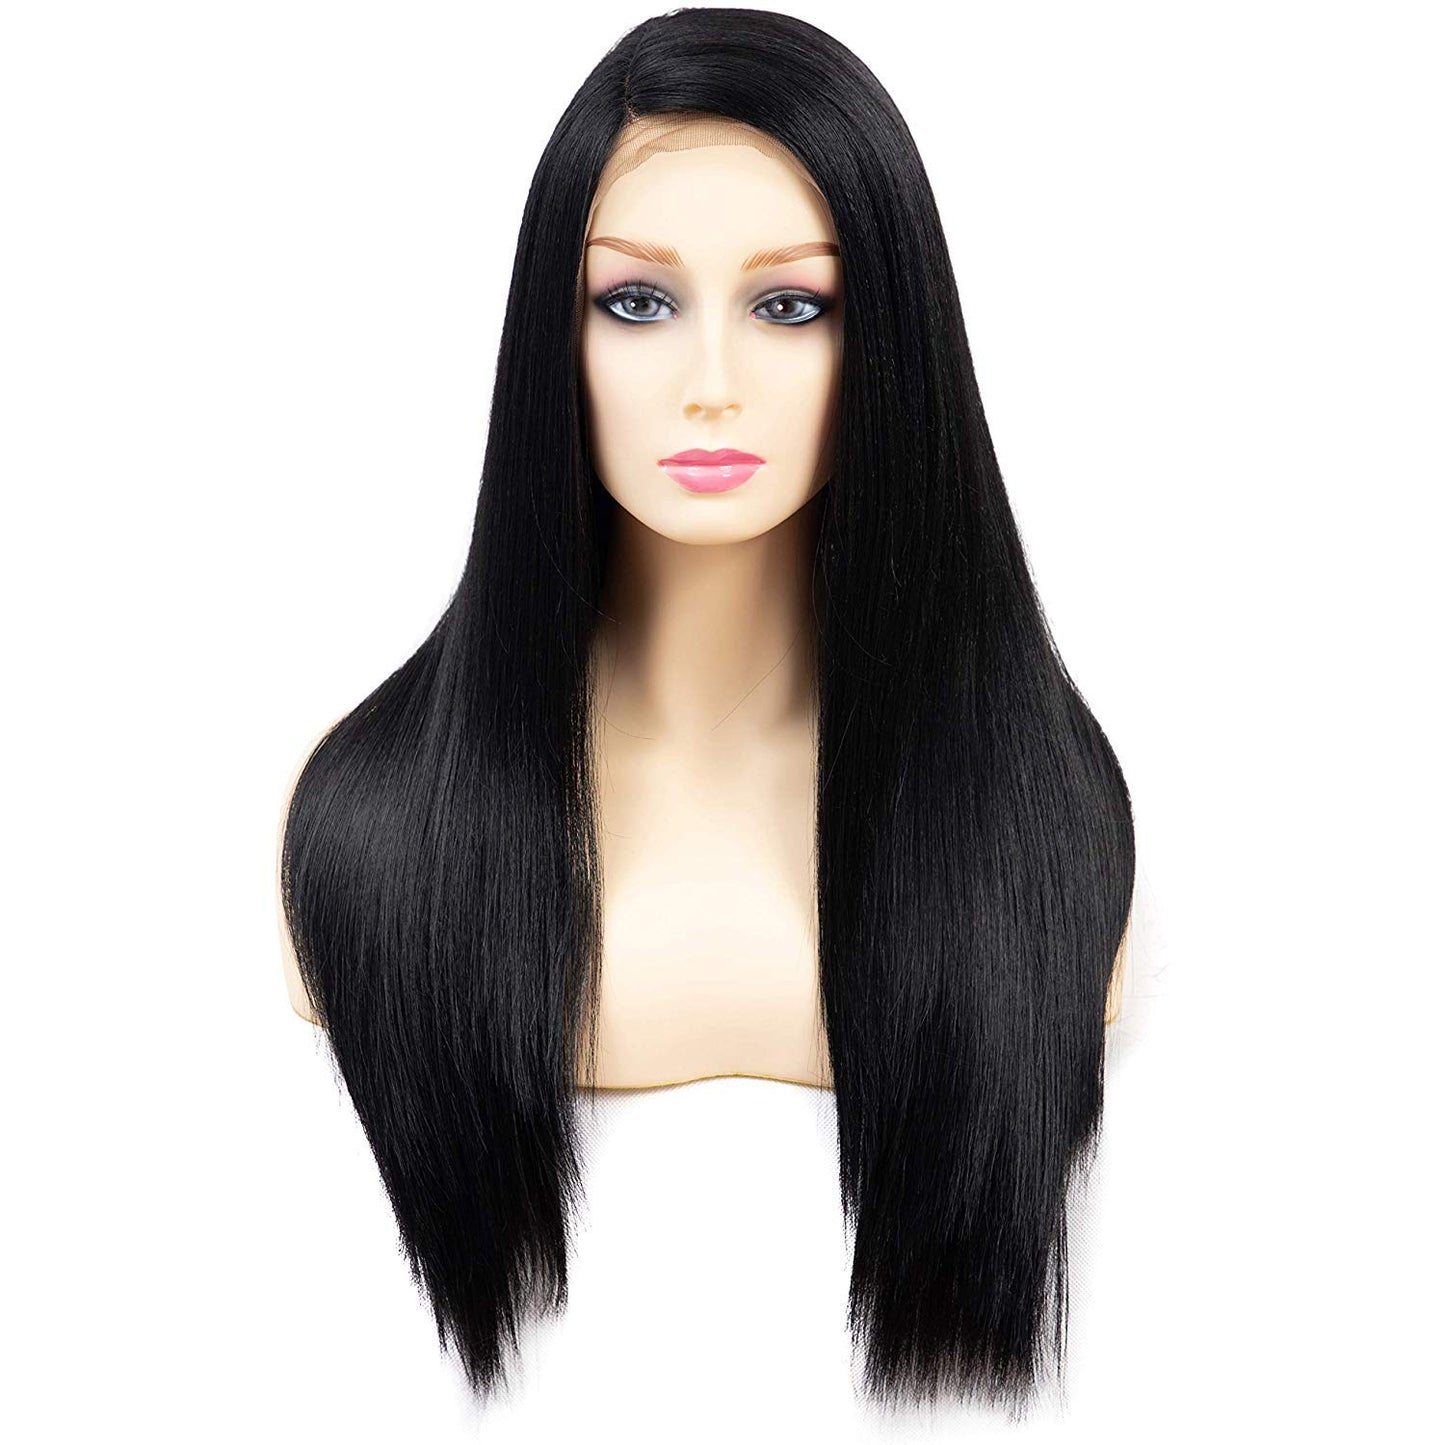 Lush Locks Synthetic Hair Natural Looking Long Black Straight Wigs with bangs  for women and girls